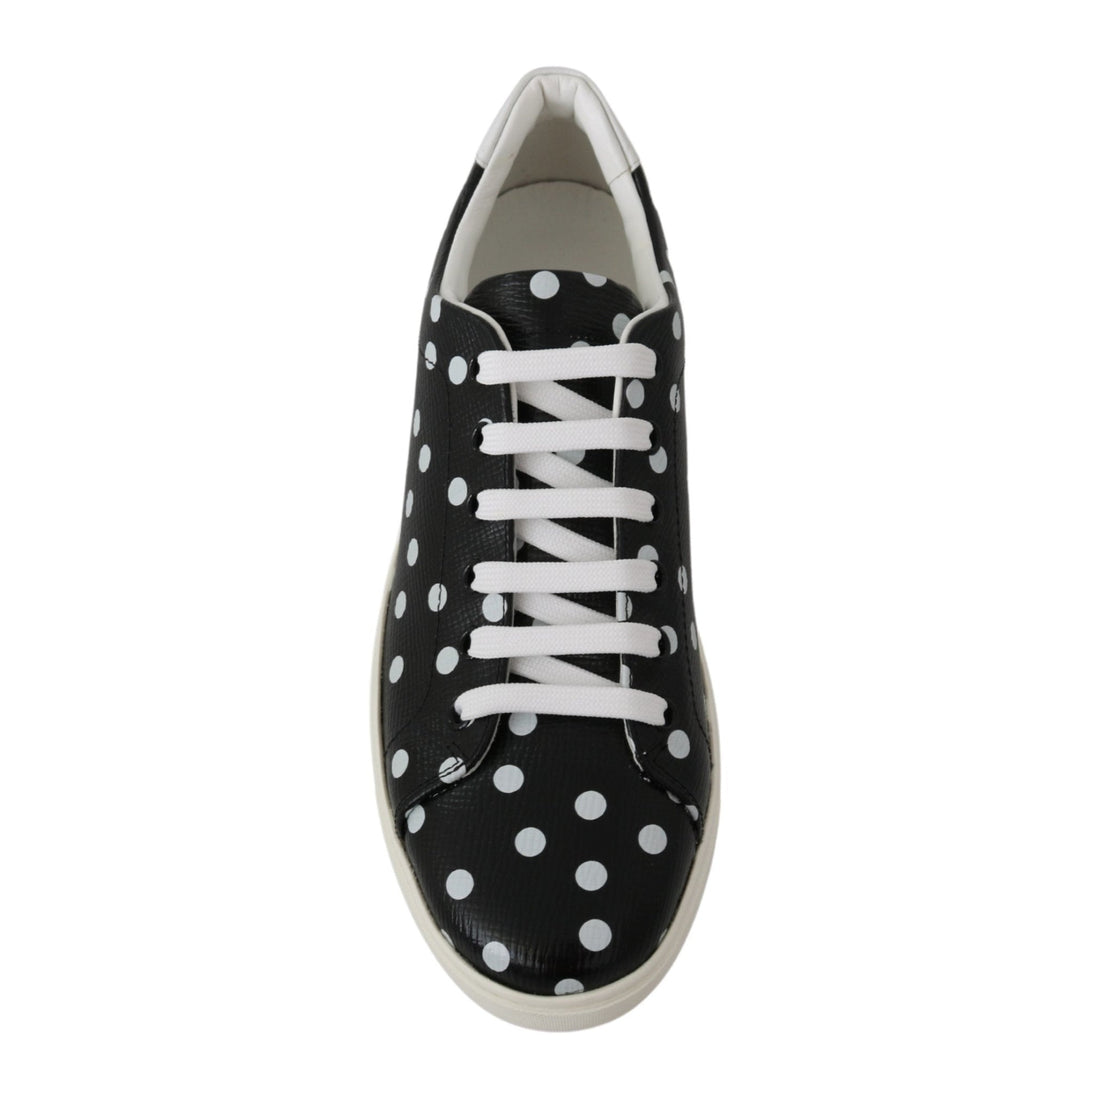 Dolce & Gabbana Black Leather Polka Dots Sneakers Shoes - Paris Deluxe